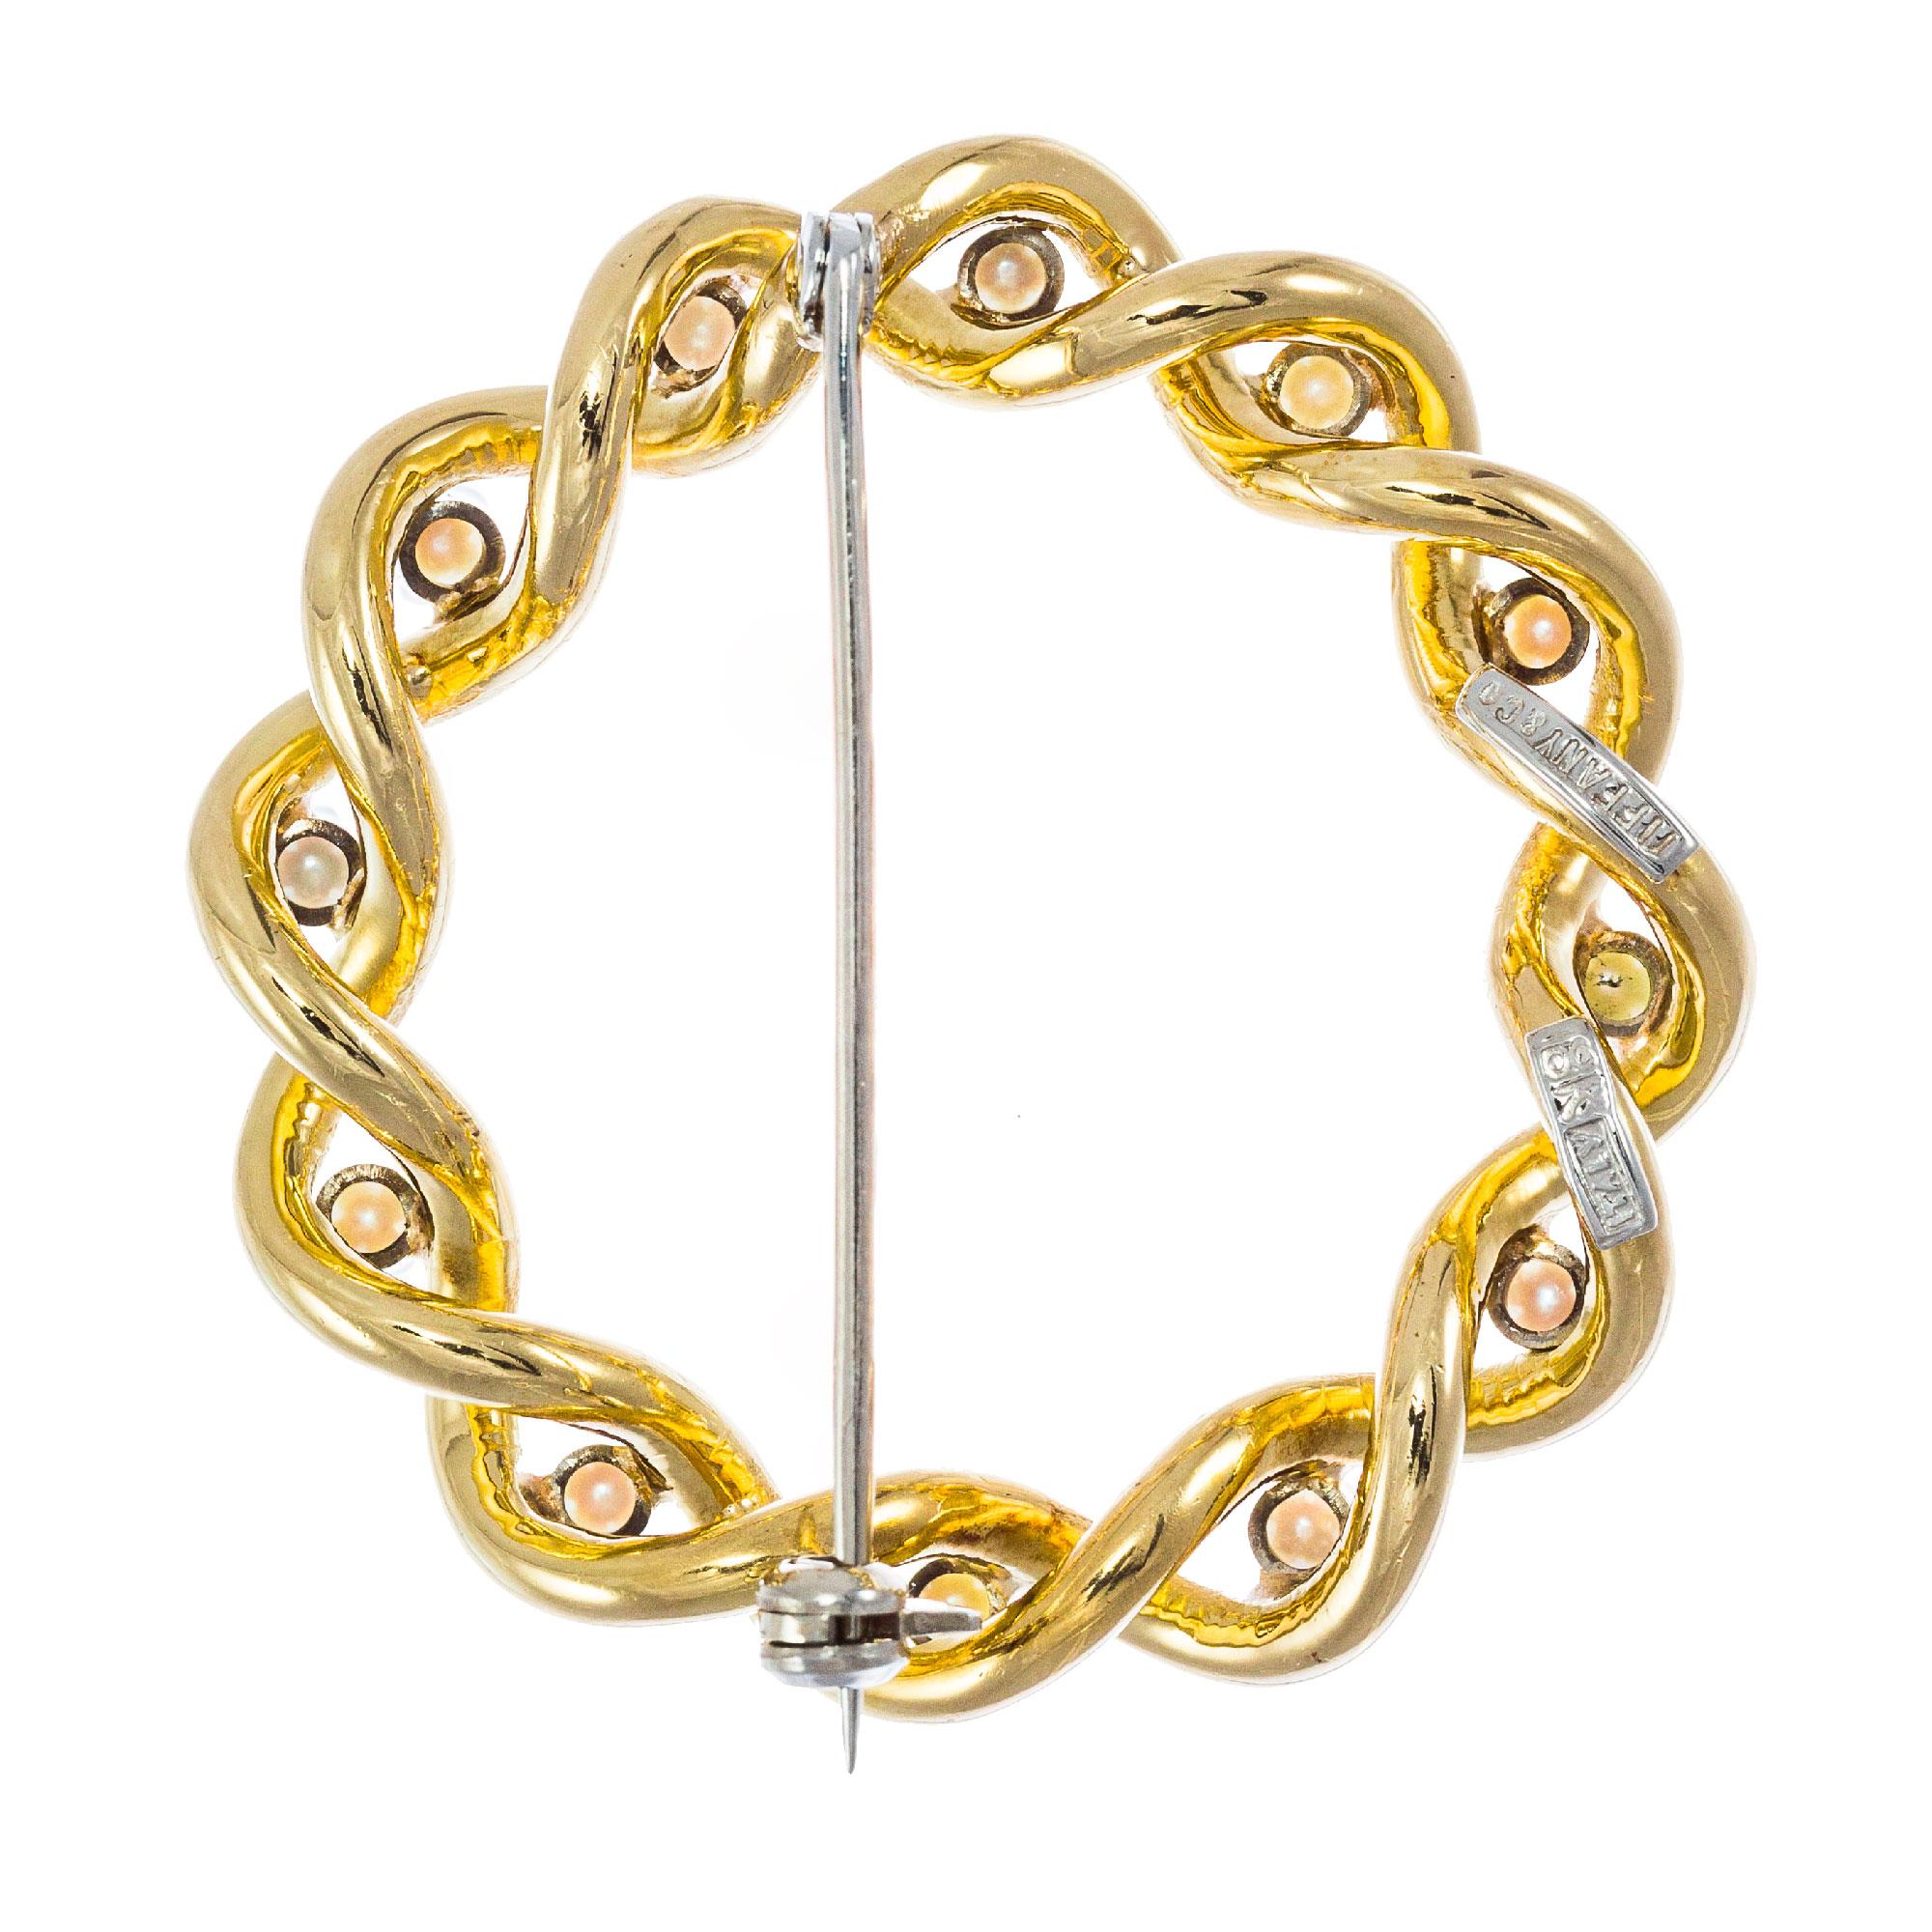 Tiffany & Co.  1960's 14k yellow brooch, set with 12 Akoya cultured pearls in a woven design. Made in Italy.

12 Japanese Akoya cultured pearls 2-2.5mm
Top to bottom: 35.39mm or 1.39 inches
Width: 35.96mm or 1.42 inches
Depth or thickness: